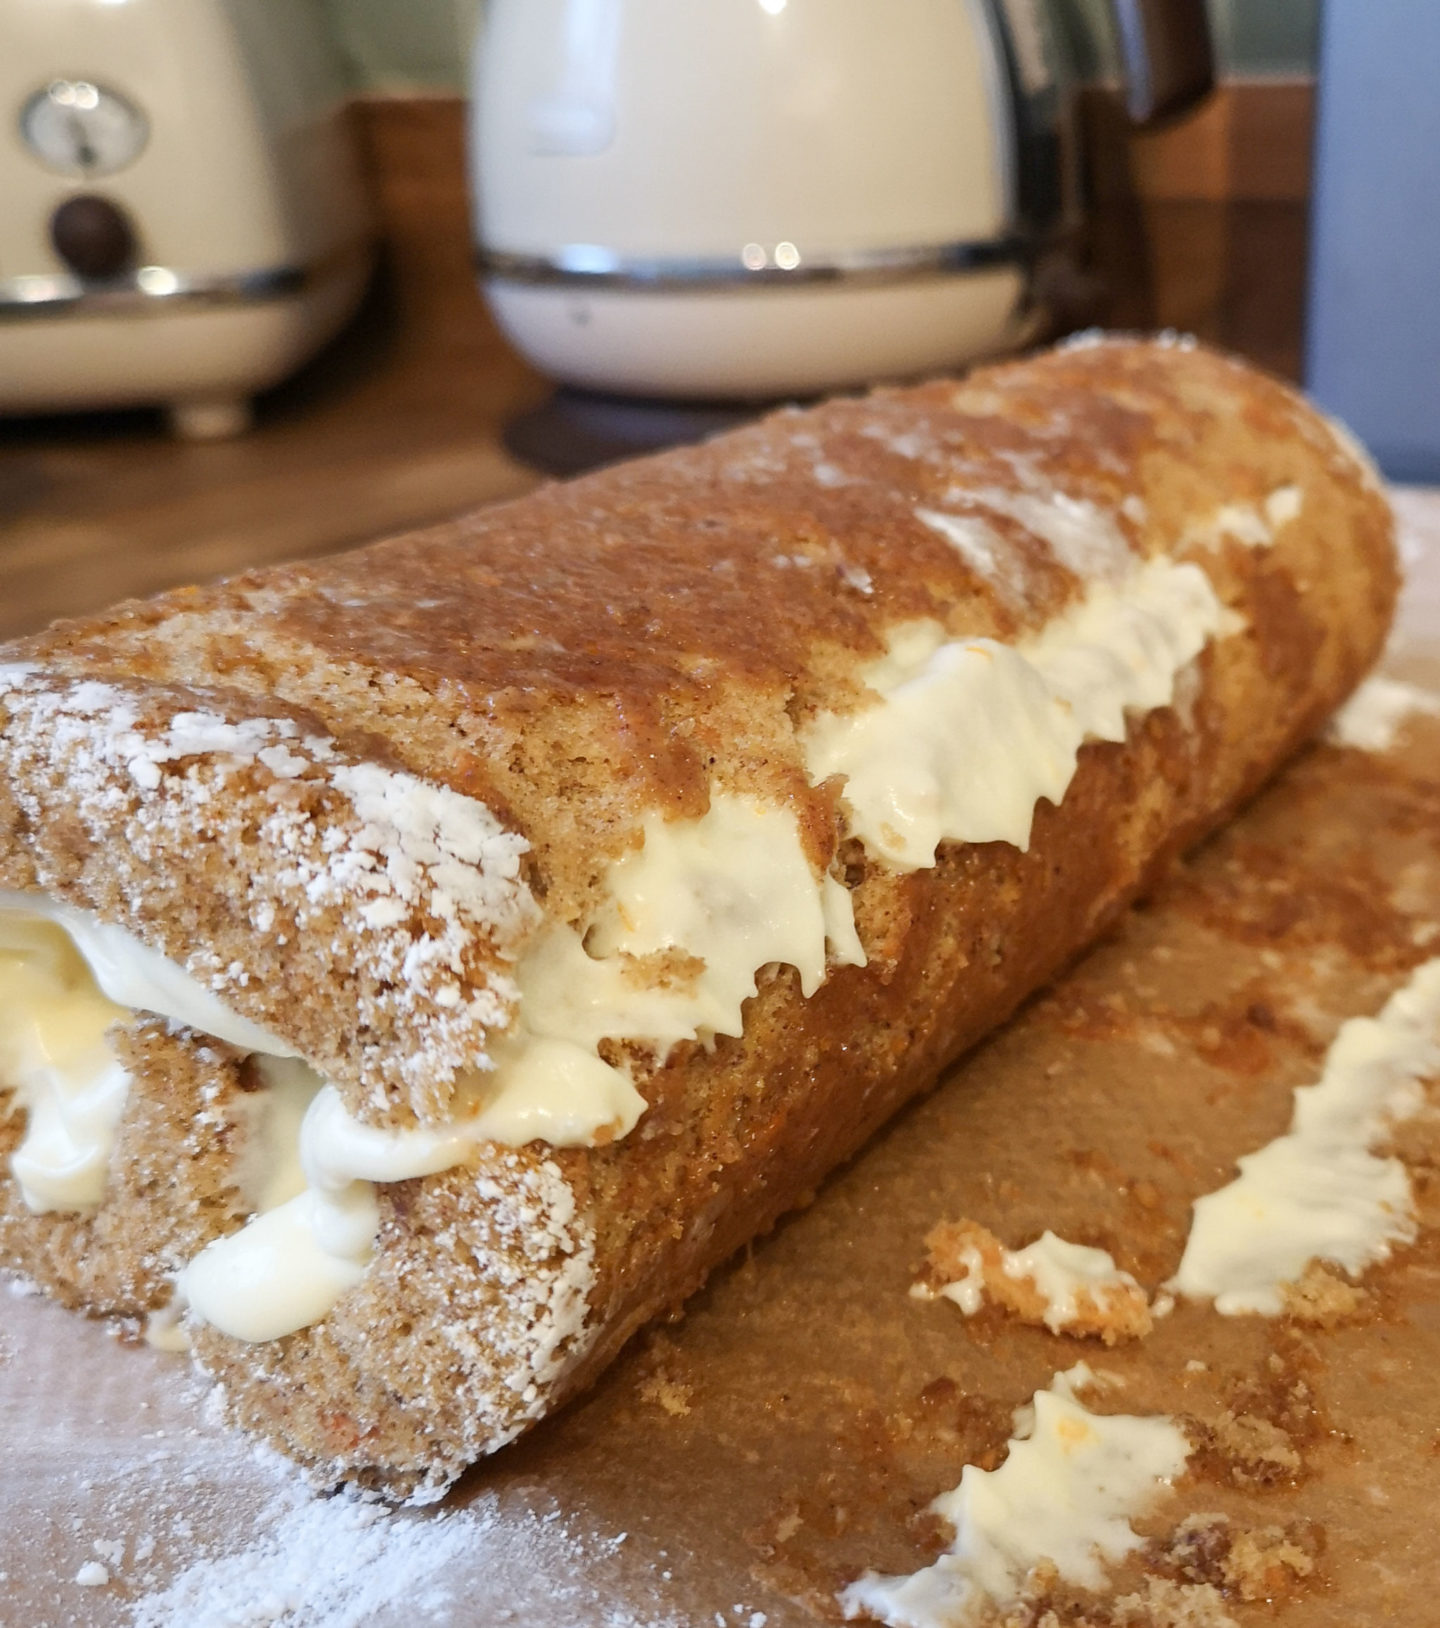 Cracked, failed attempt at carrot cake Swiss roll